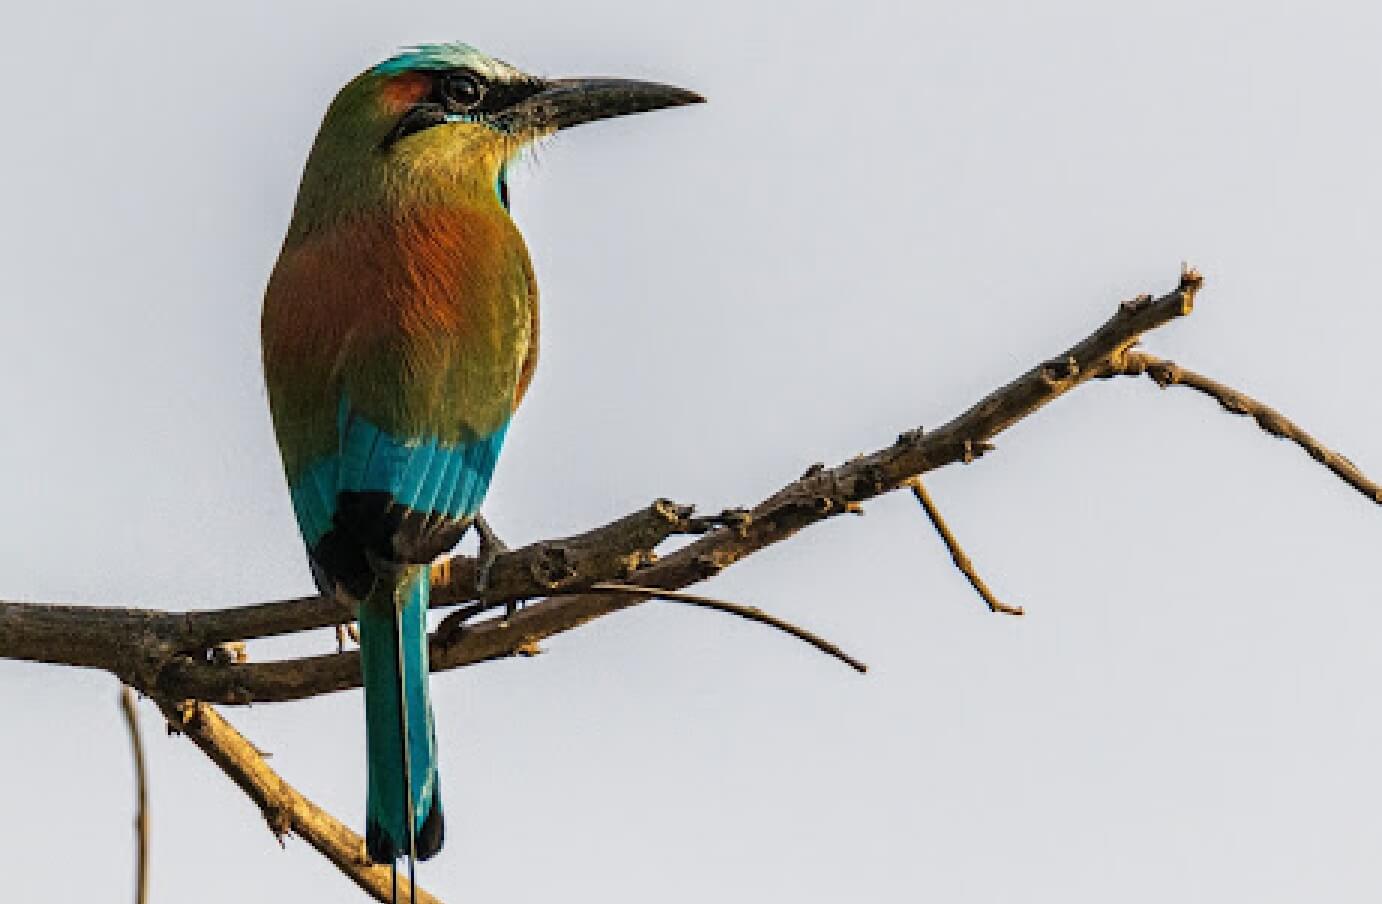 Colorful Motmot perched on a branch looking out into the sky